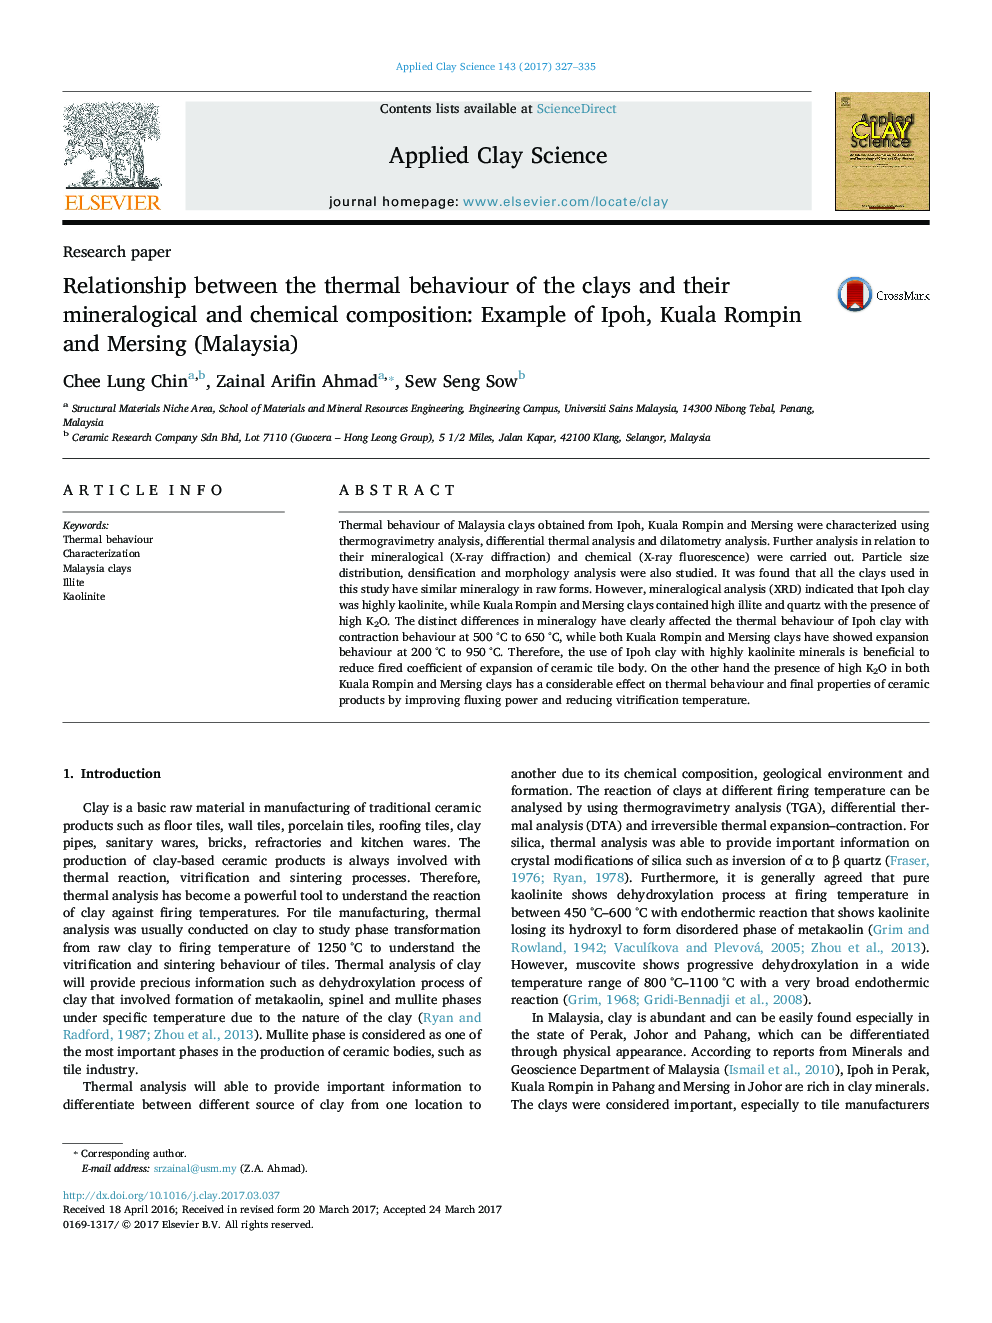 Relationship between the thermal behaviour of the clays and their mineralogical and chemical composition: Example of Ipoh, Kuala Rompin and Mersing (Malaysia)